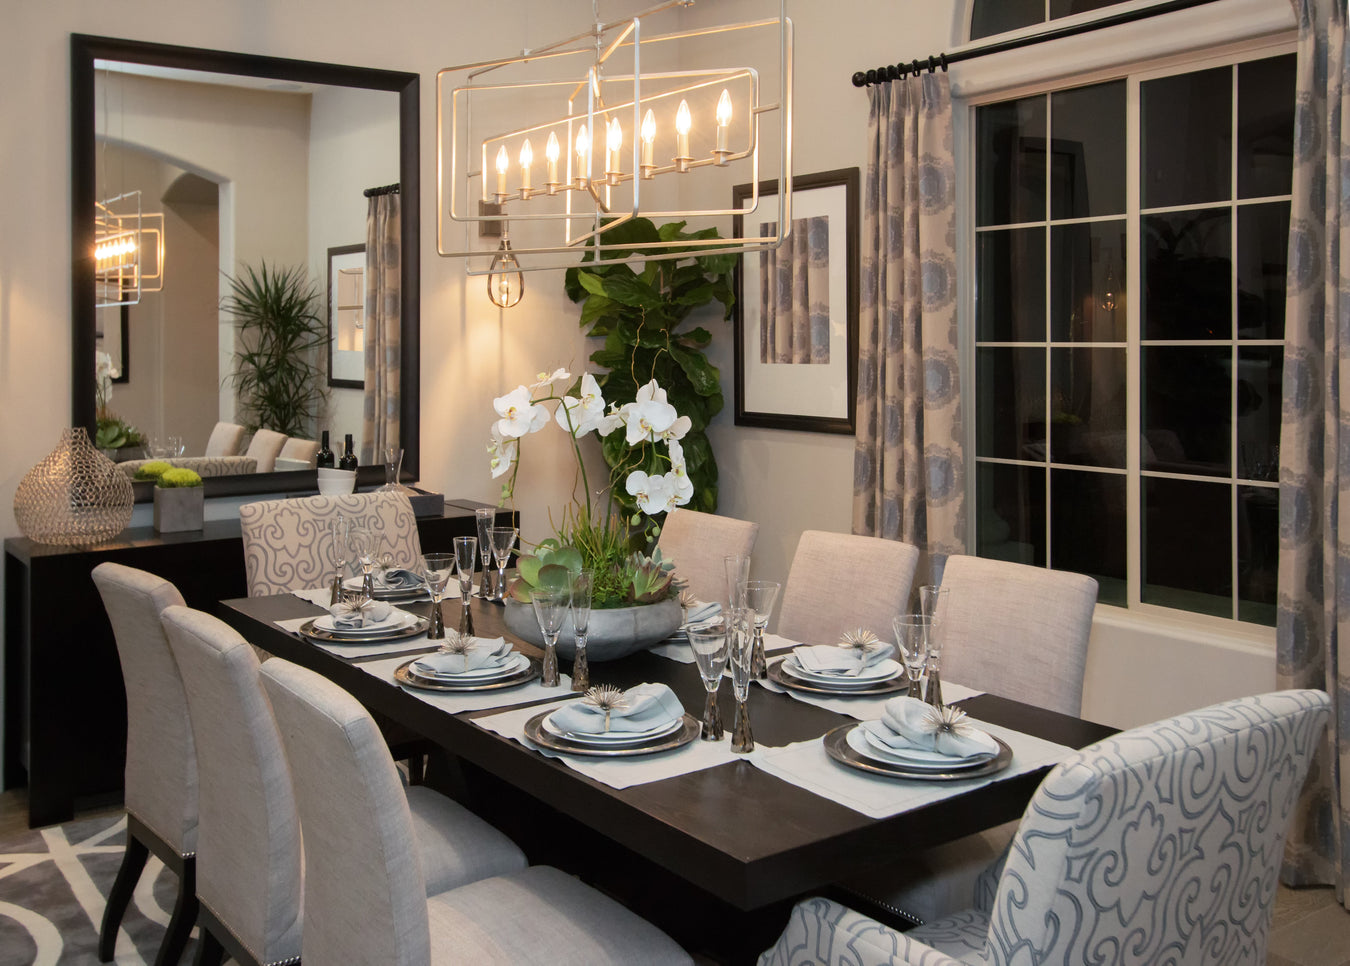 Formal dining room showing dining table, dining chairs, mirror and chandelier, home decor